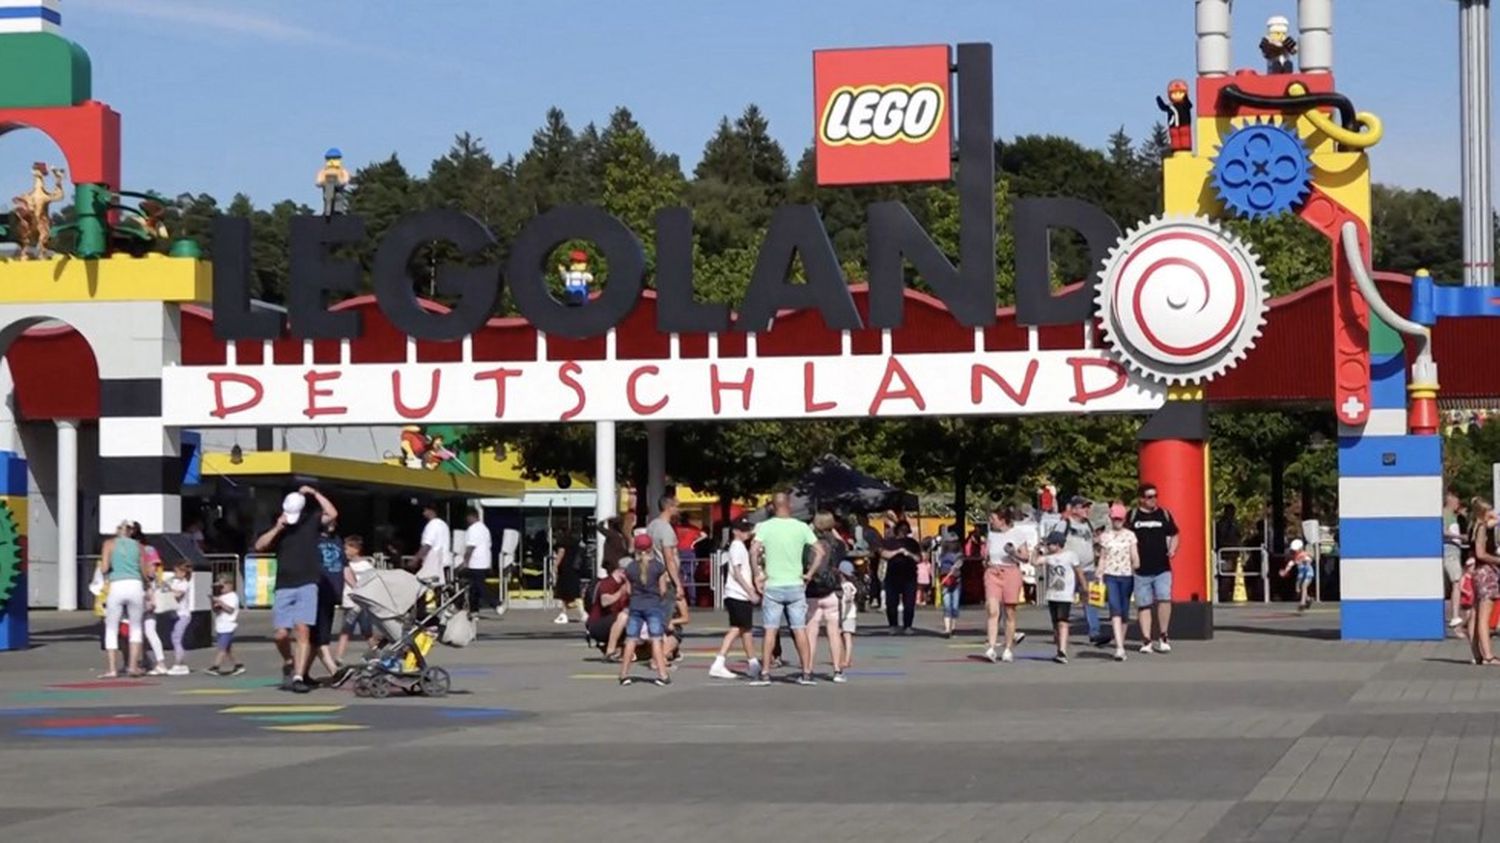 Germany: an accident in an amusement park leaves 31 injured, including ten children
